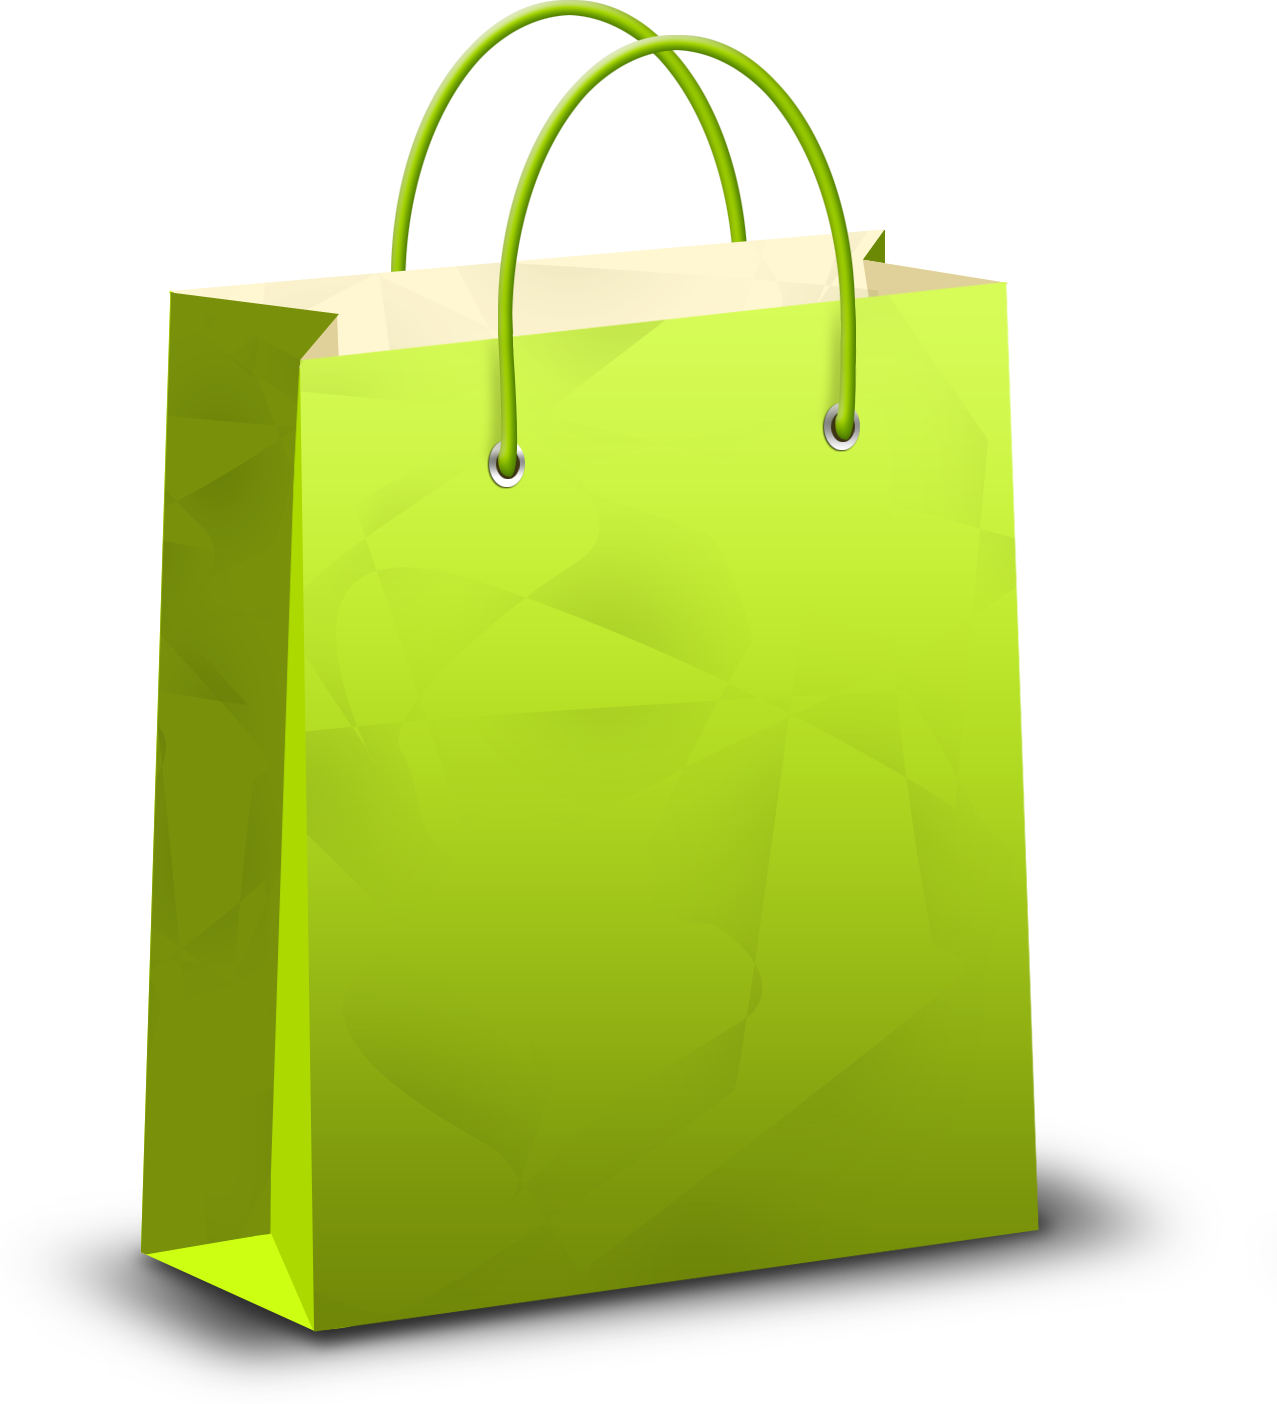 Pink Shopping Bag Vector Hd PNG Images, Pink Shopping Bag, Pink, Shopping, Bag  PNG Image For Free Download